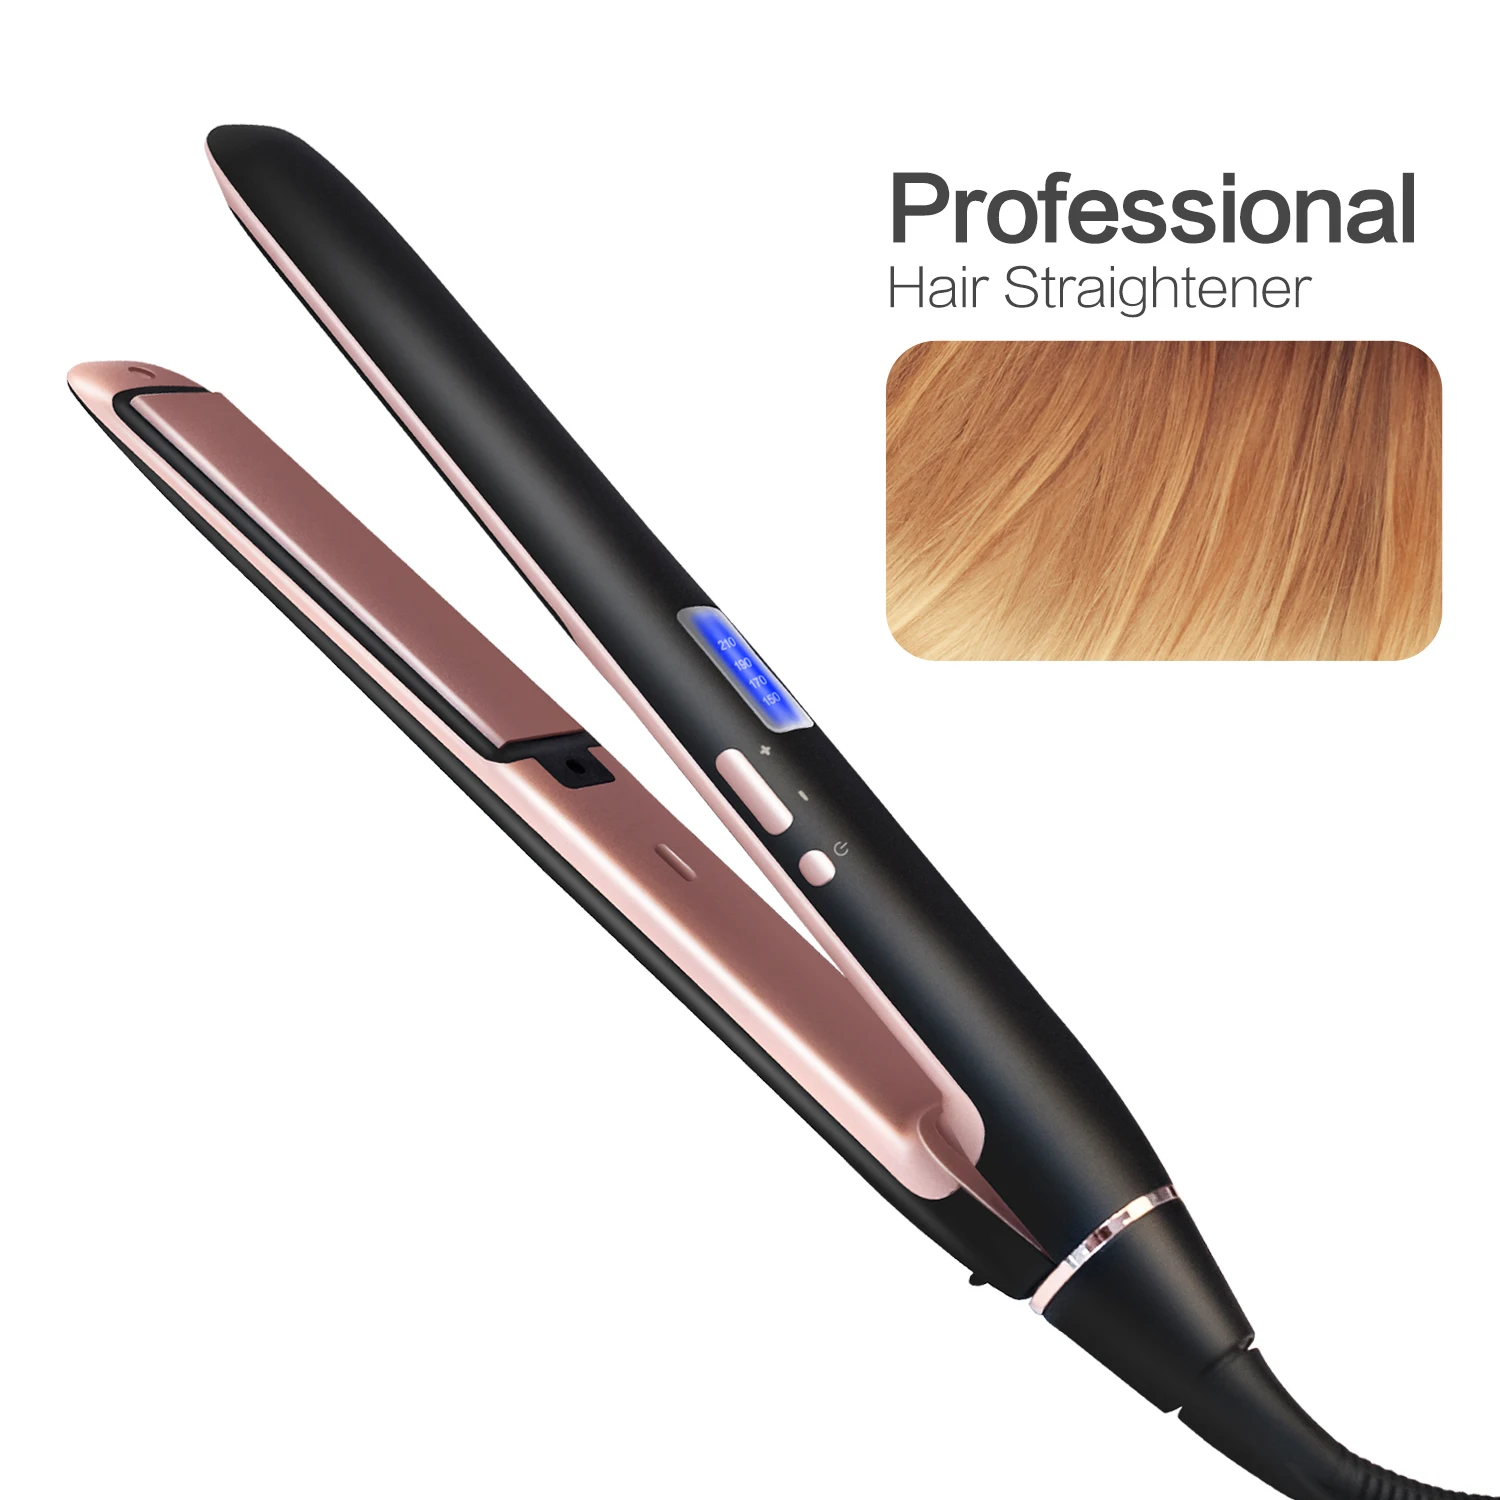 

2 In 1 Professional Hair Straightener For Wet or Dry Hair Electric Iron Curling Straightening Irons Smoothing Hair Styling Tools